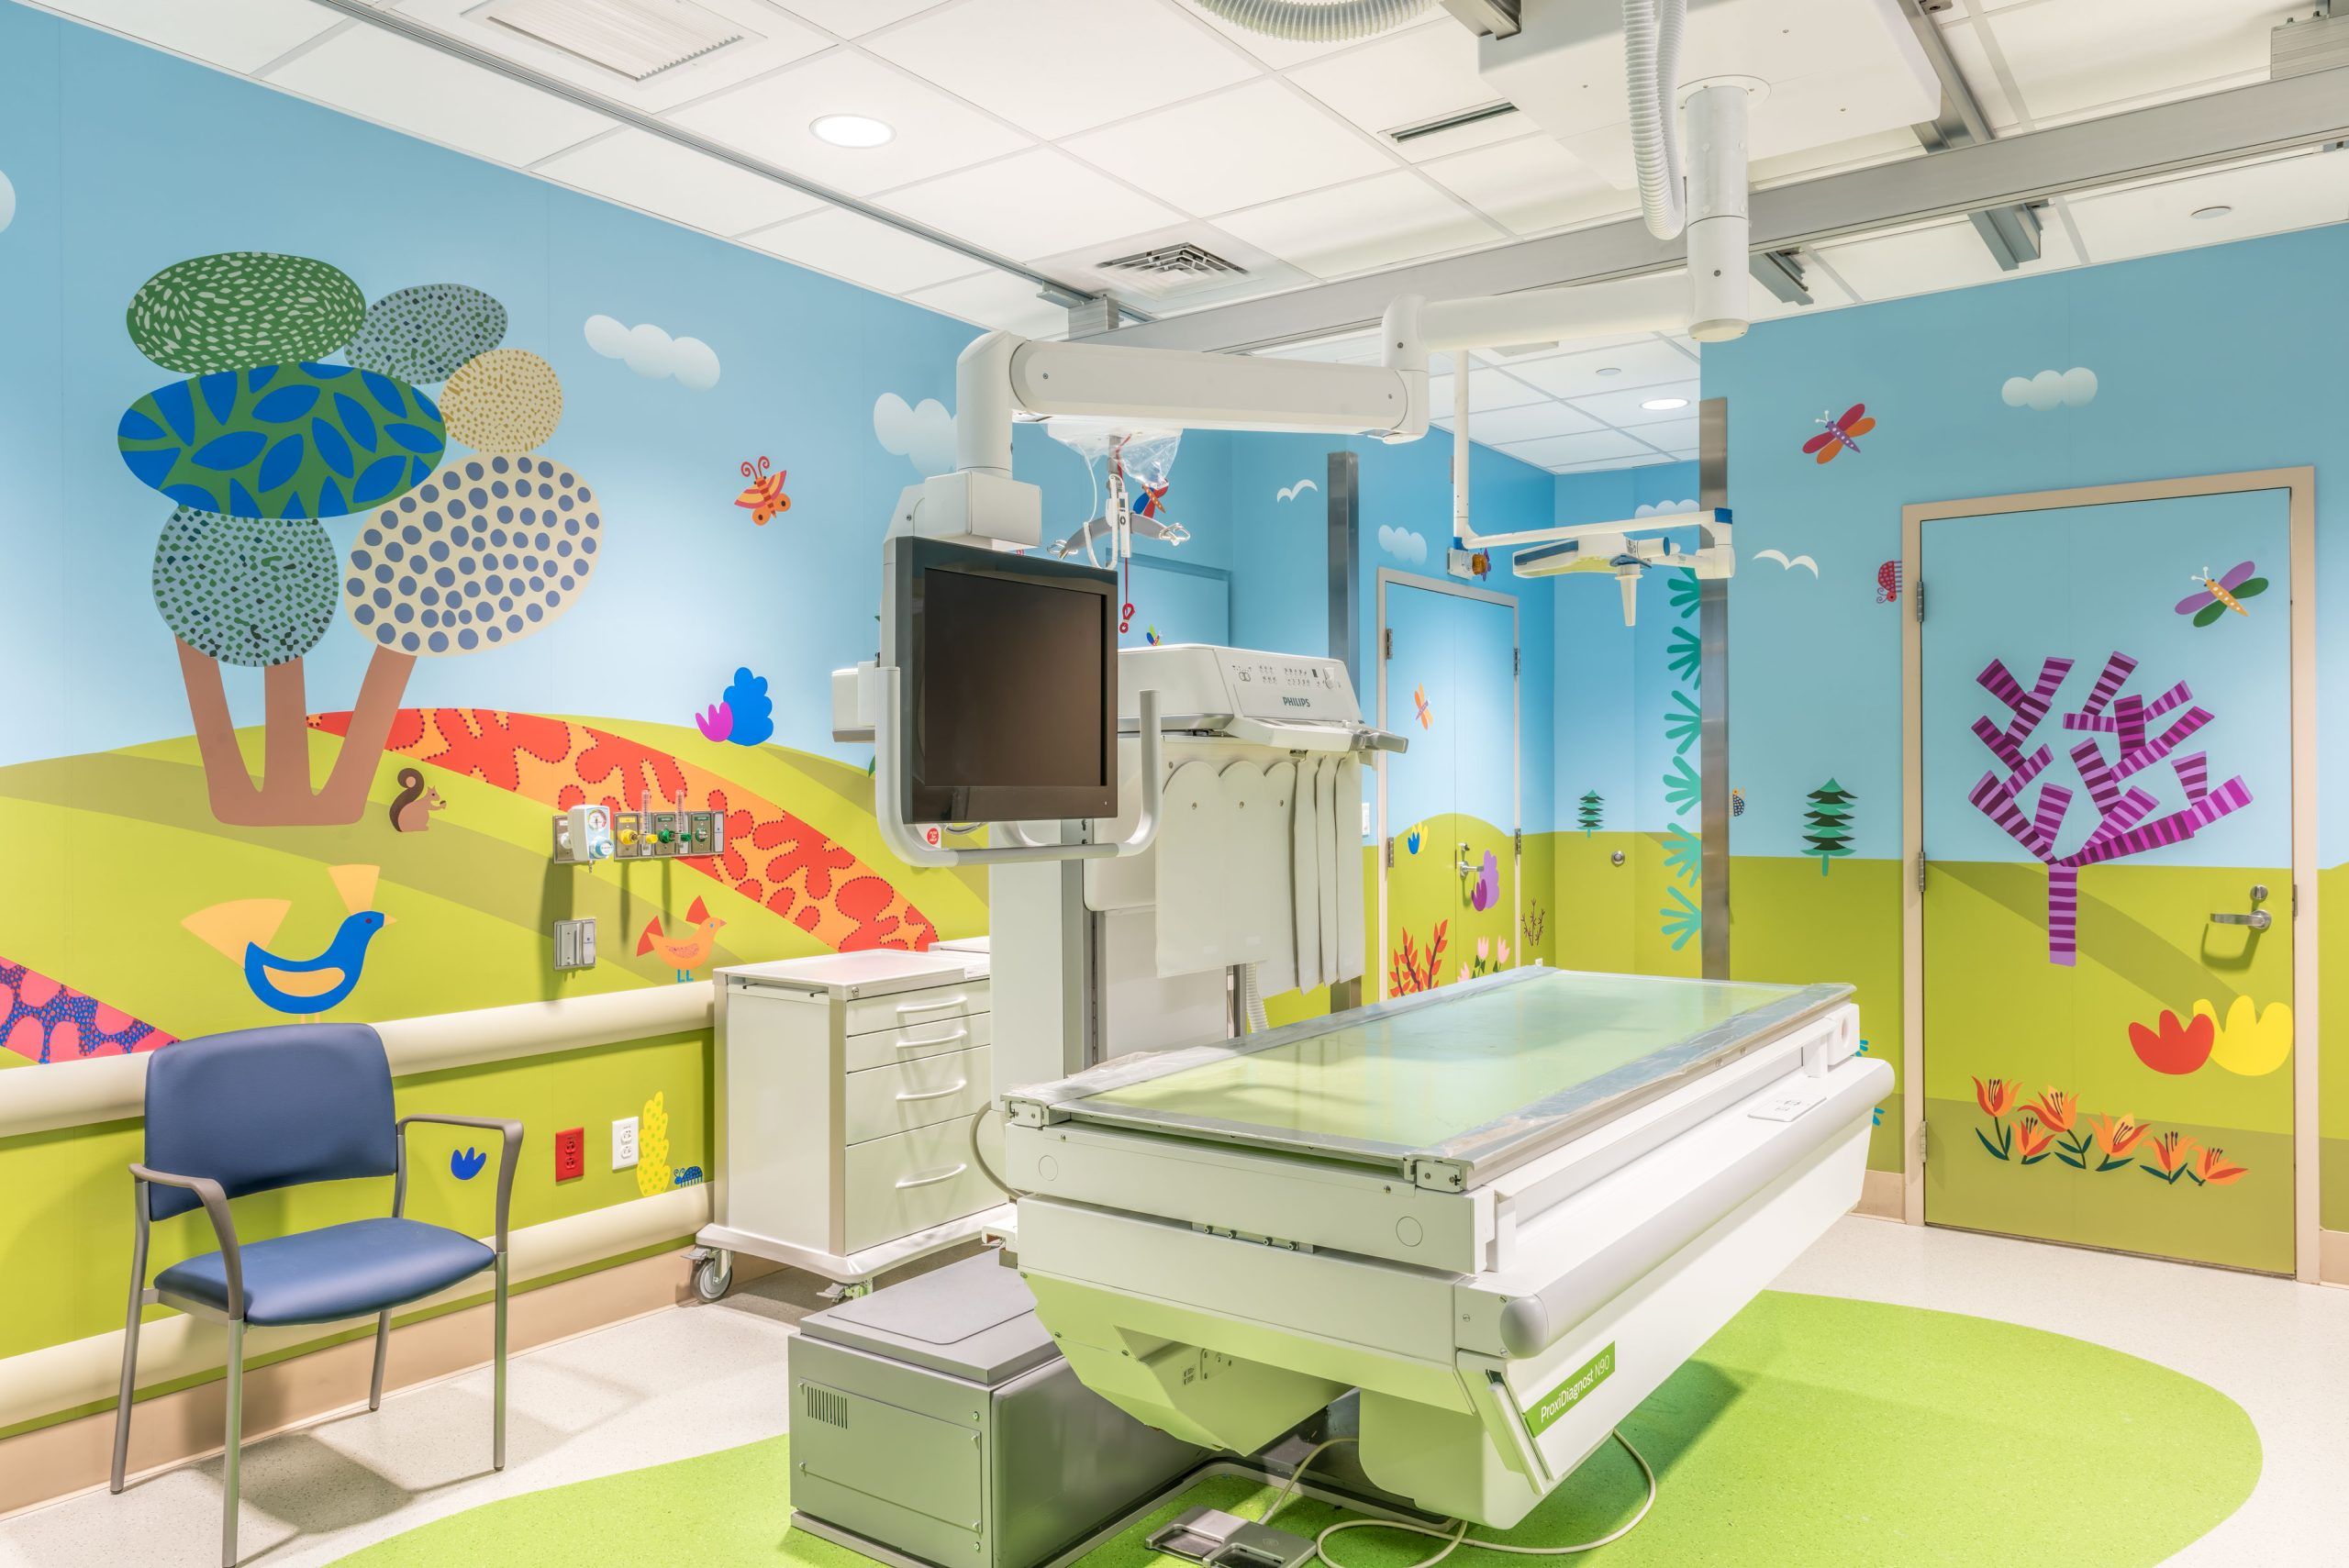 Imaginative Design with Boston Children’s Hospital: Wise Construction Delivers a State-of-The-Art Fluoroscopy Room